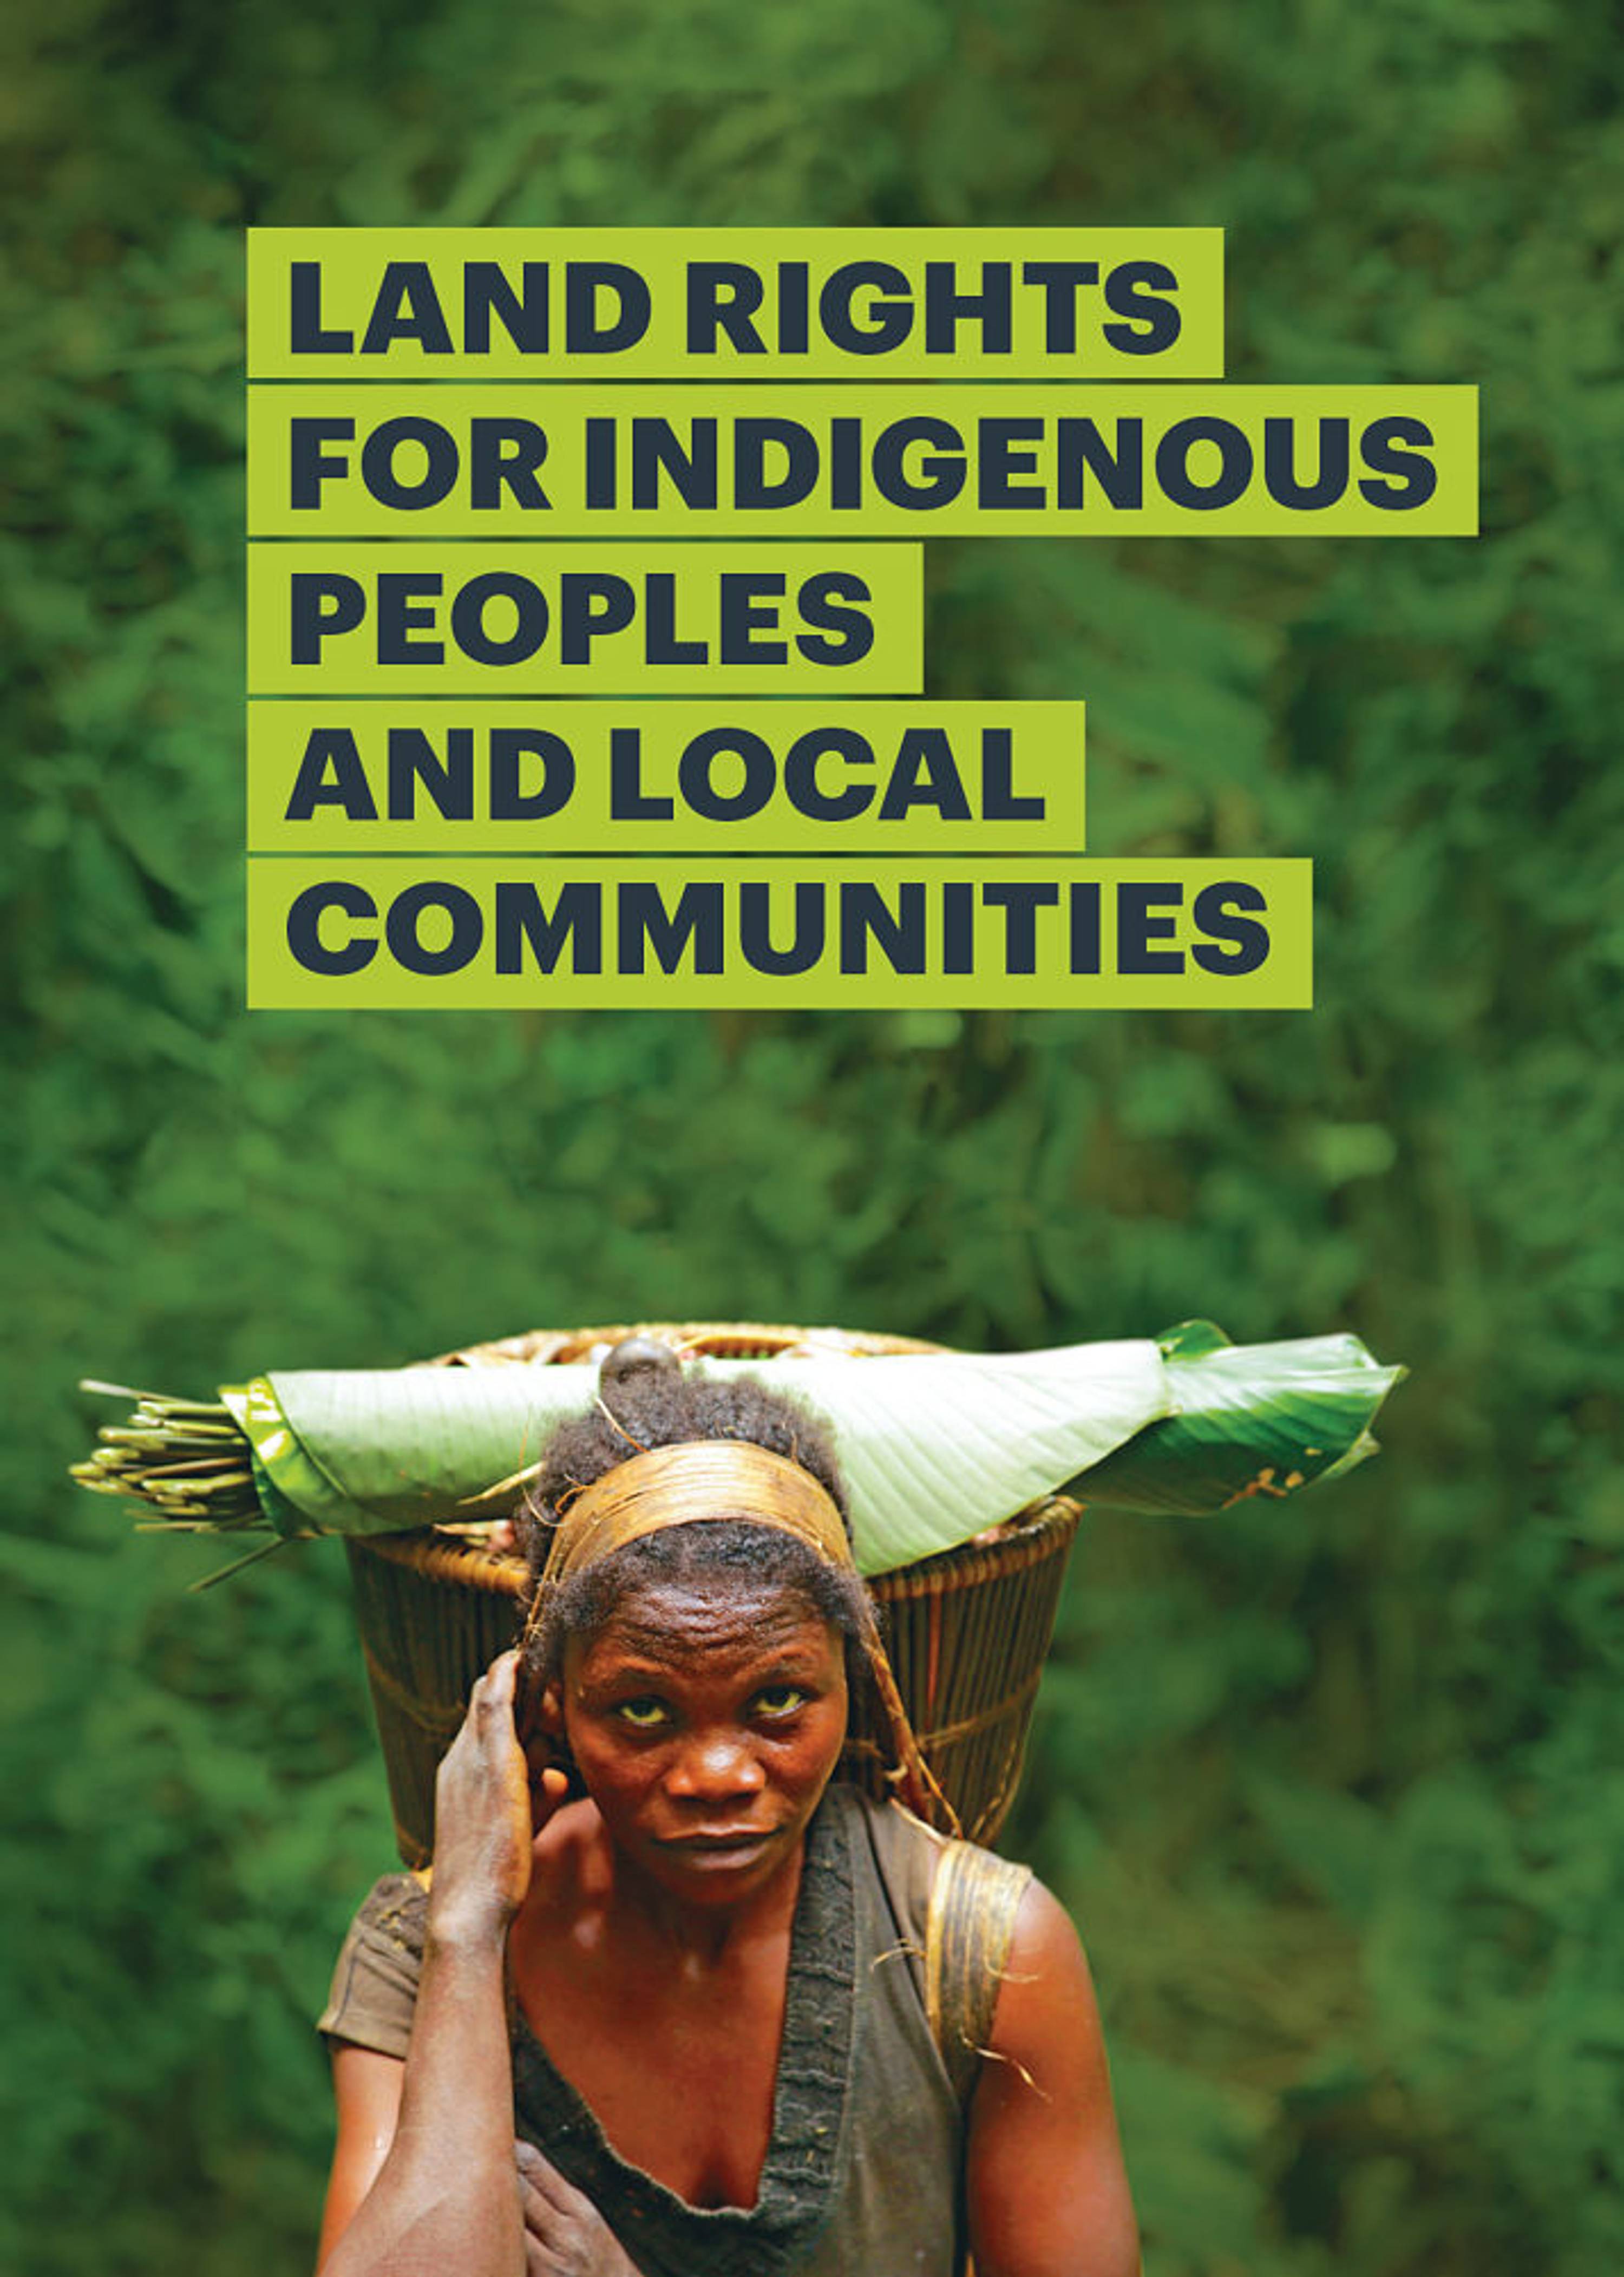 Indigenous land rights